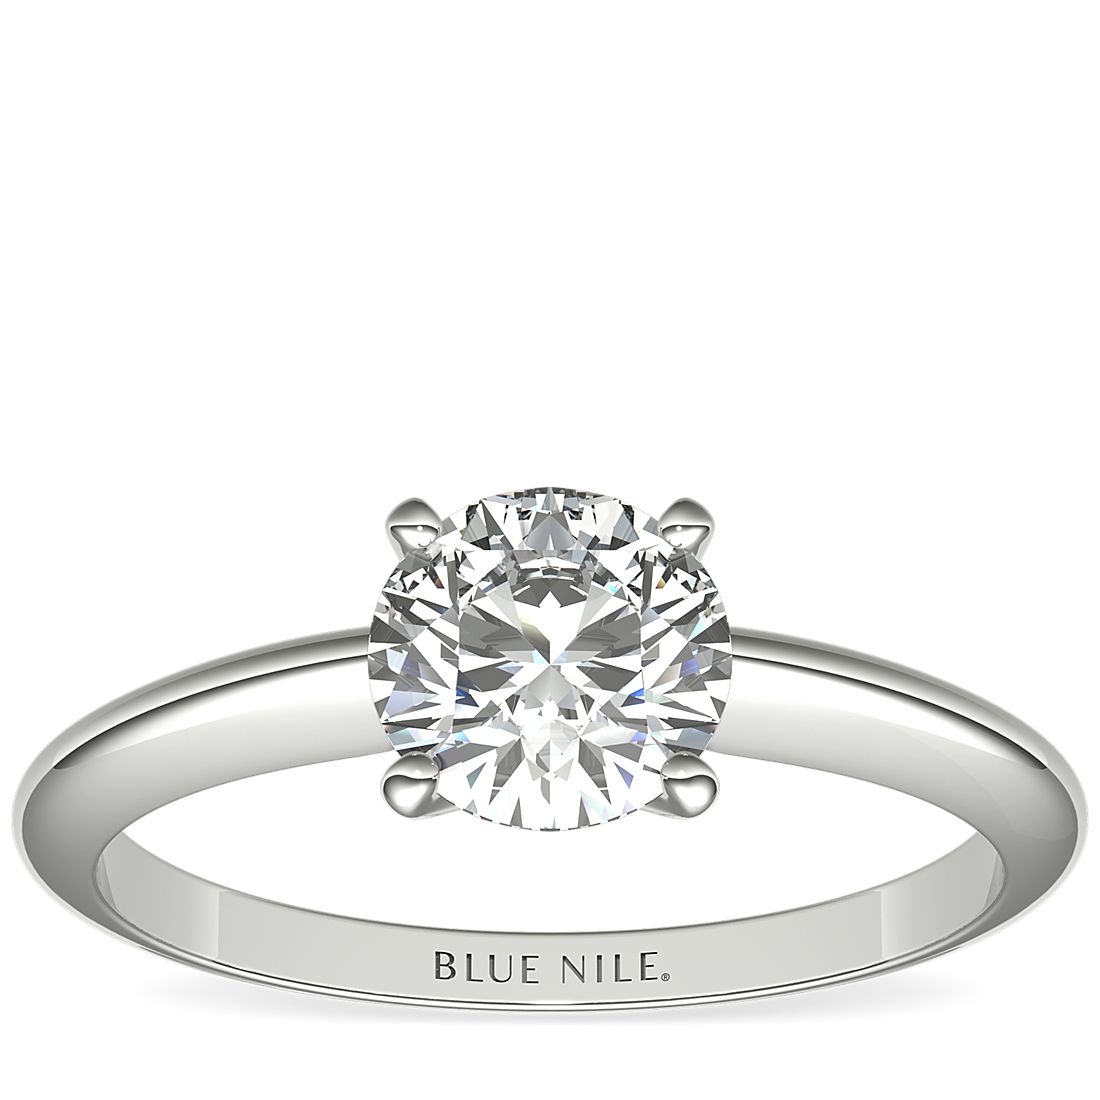 overschrijving houd er rekening mee dat Grootste Classic Four-Prong Solitaire Engagement Ring in 18k White Gold | Blue Nile